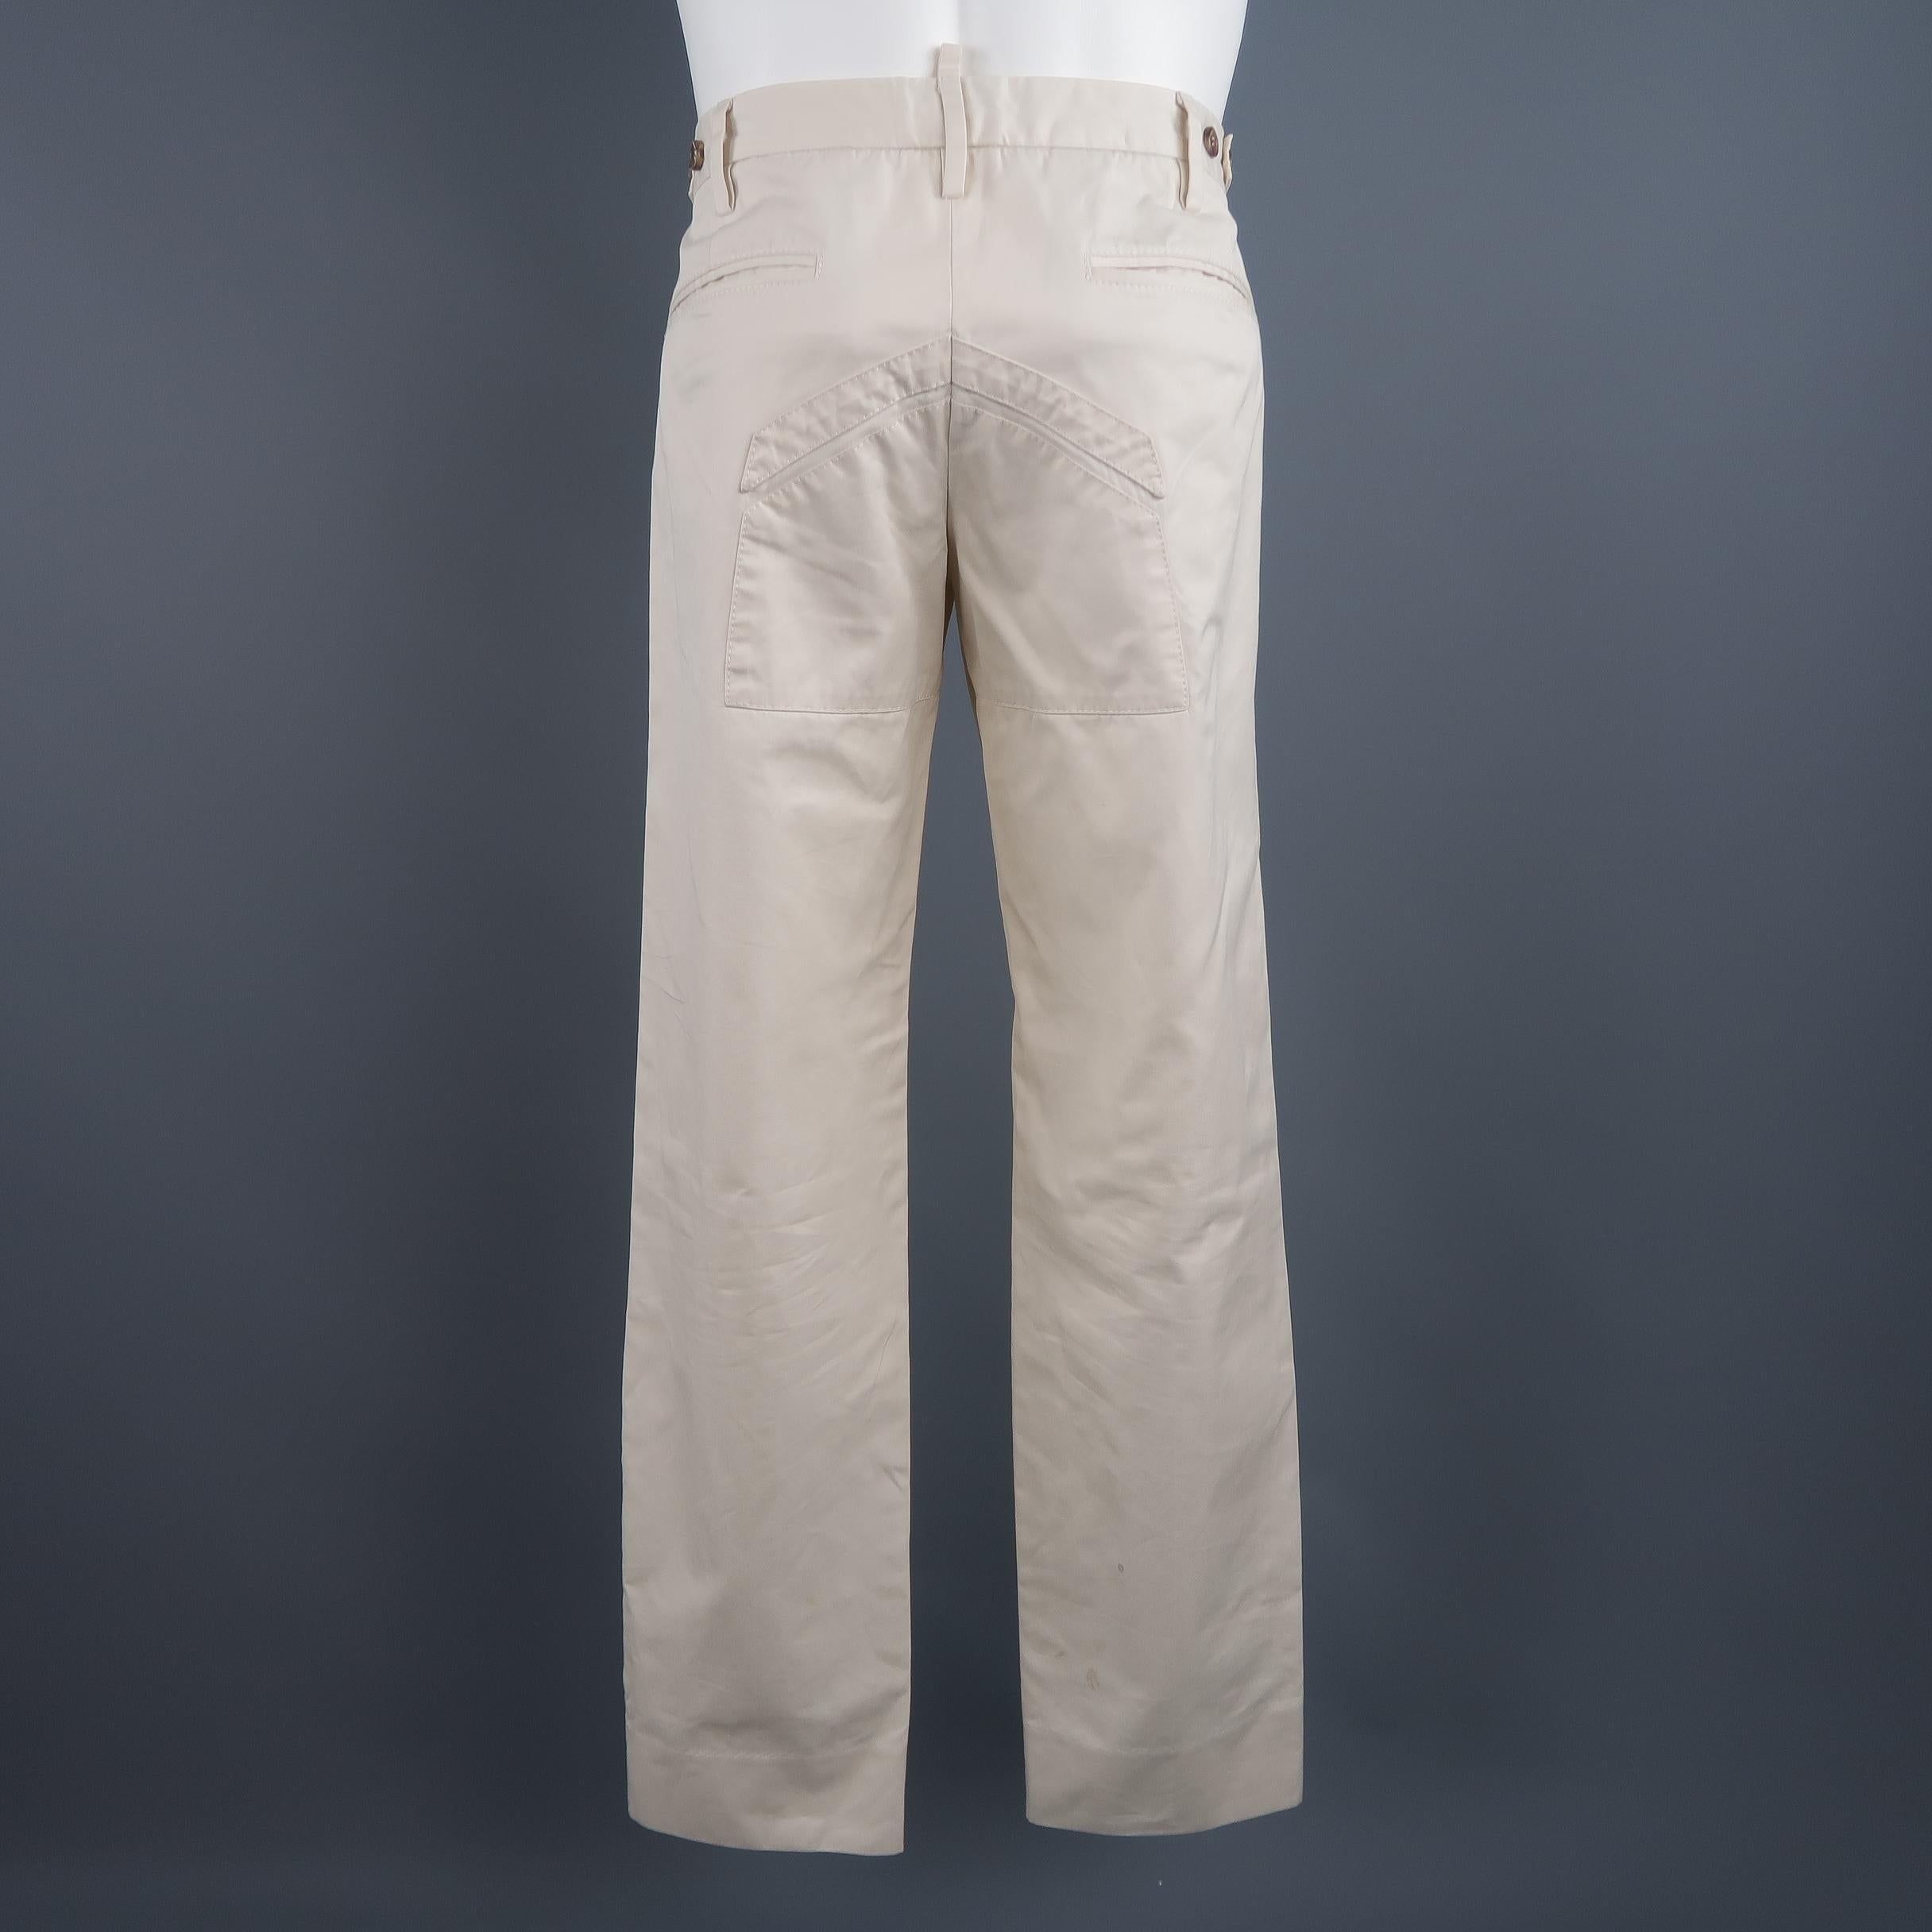 Men's DSQUARED2 Casual solid cream cotton pants with patch details 